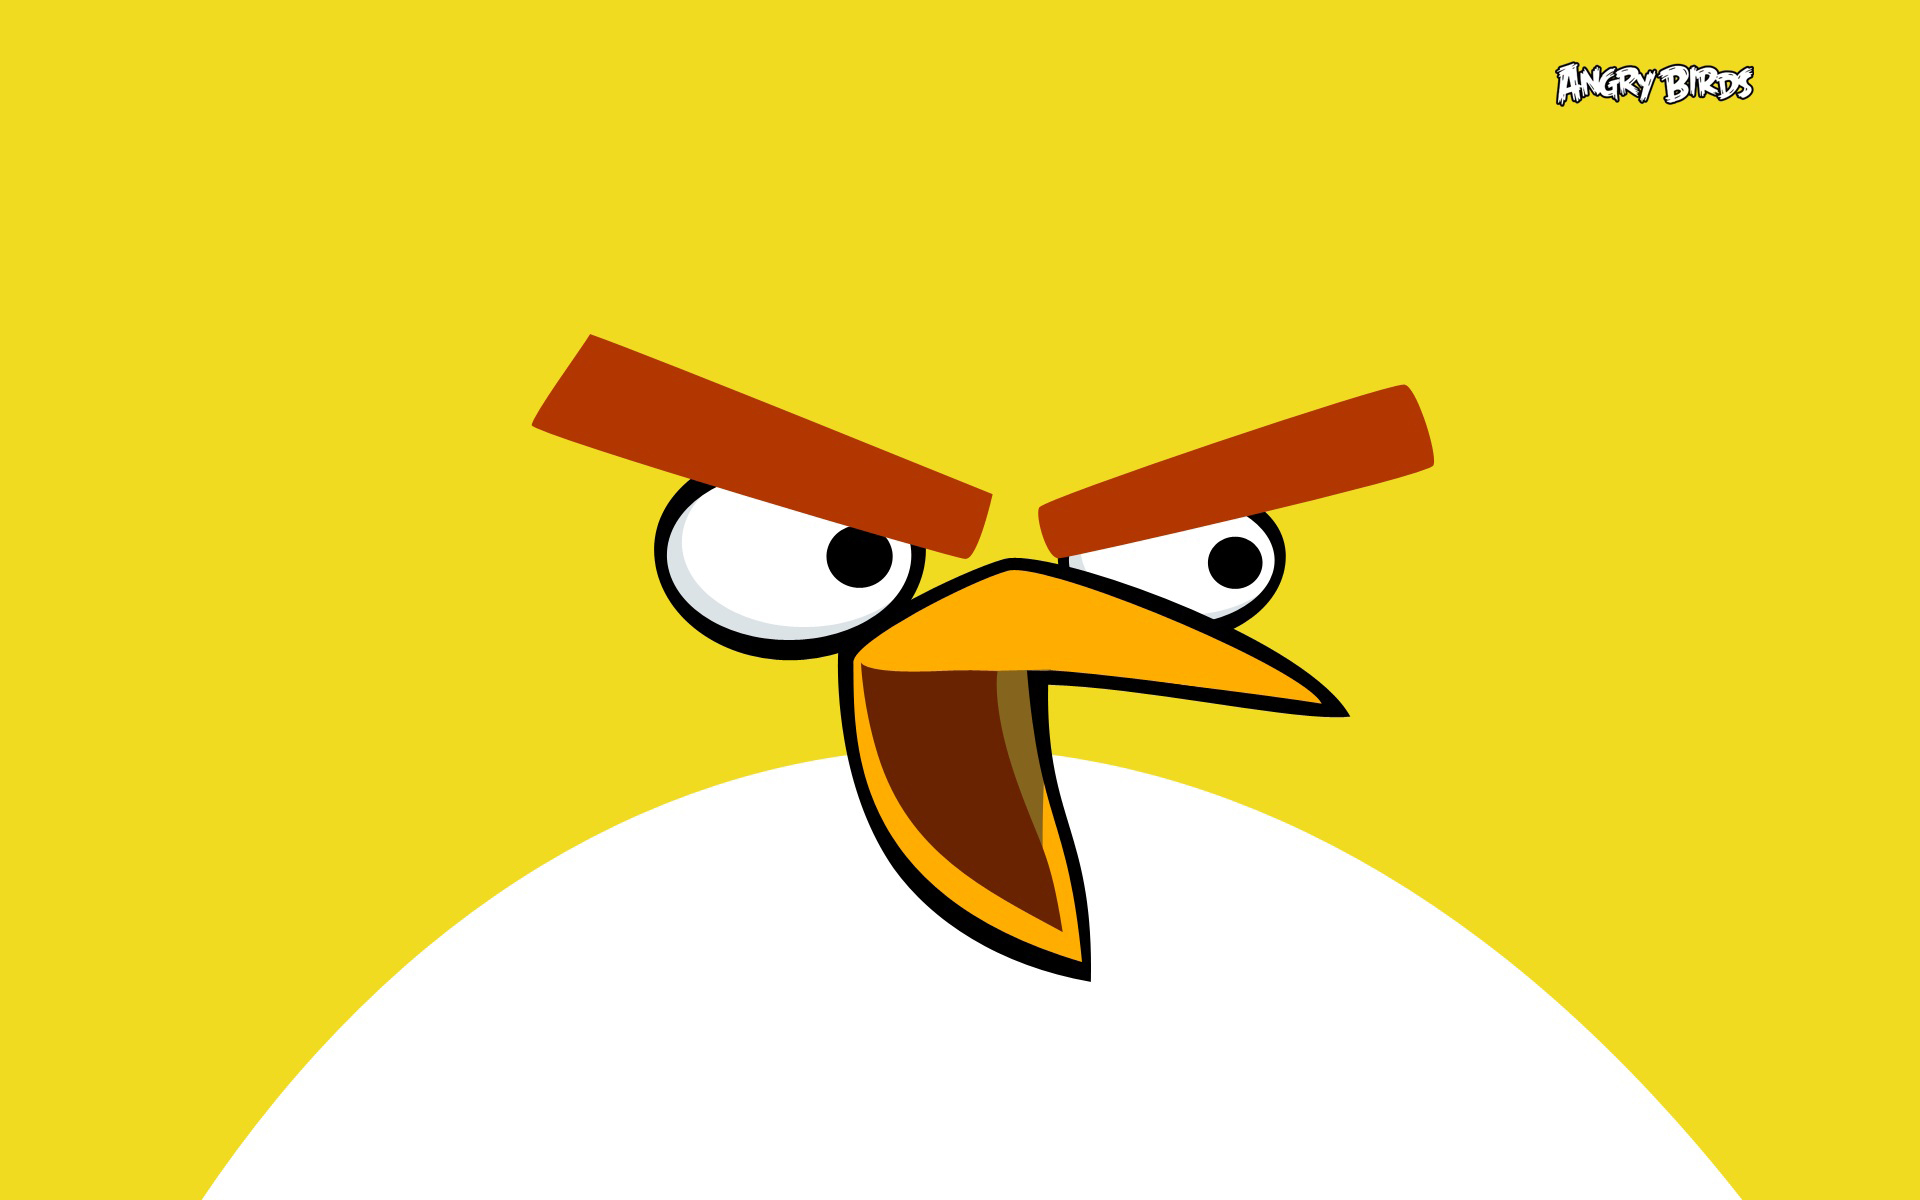 angry birds, games, yellow